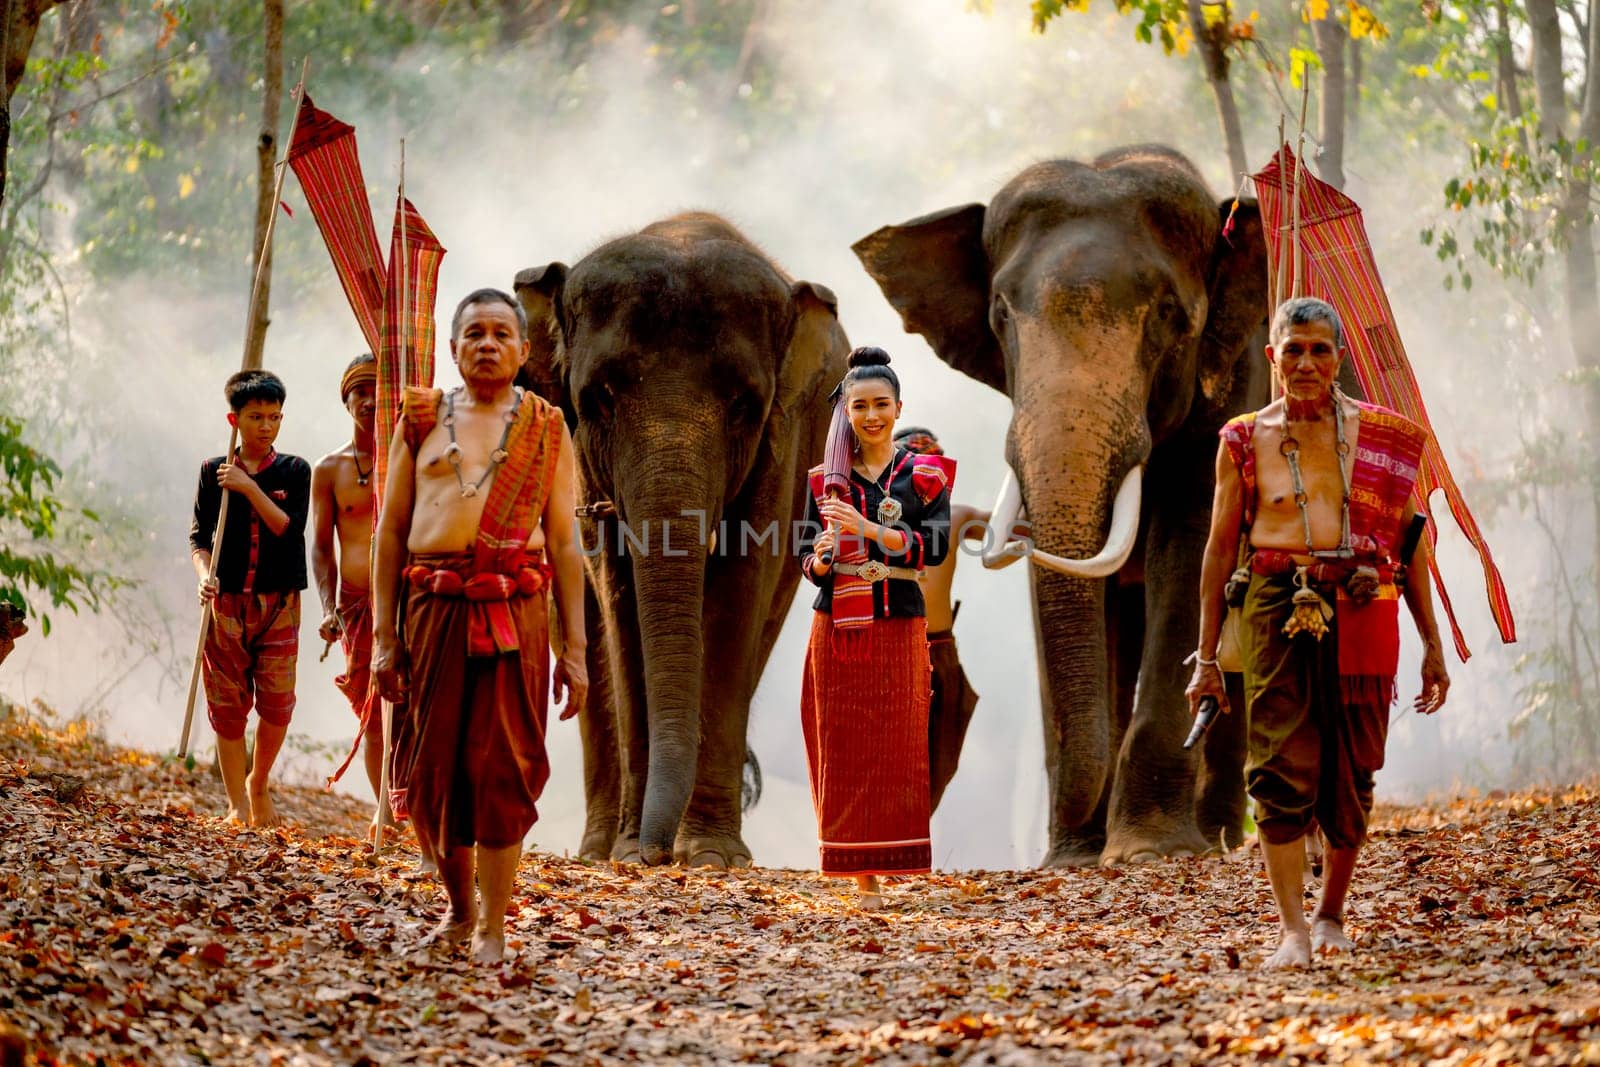 Parade of man and woman of mahout village walk along the road in forest with elephant and flags look like some ceremony.